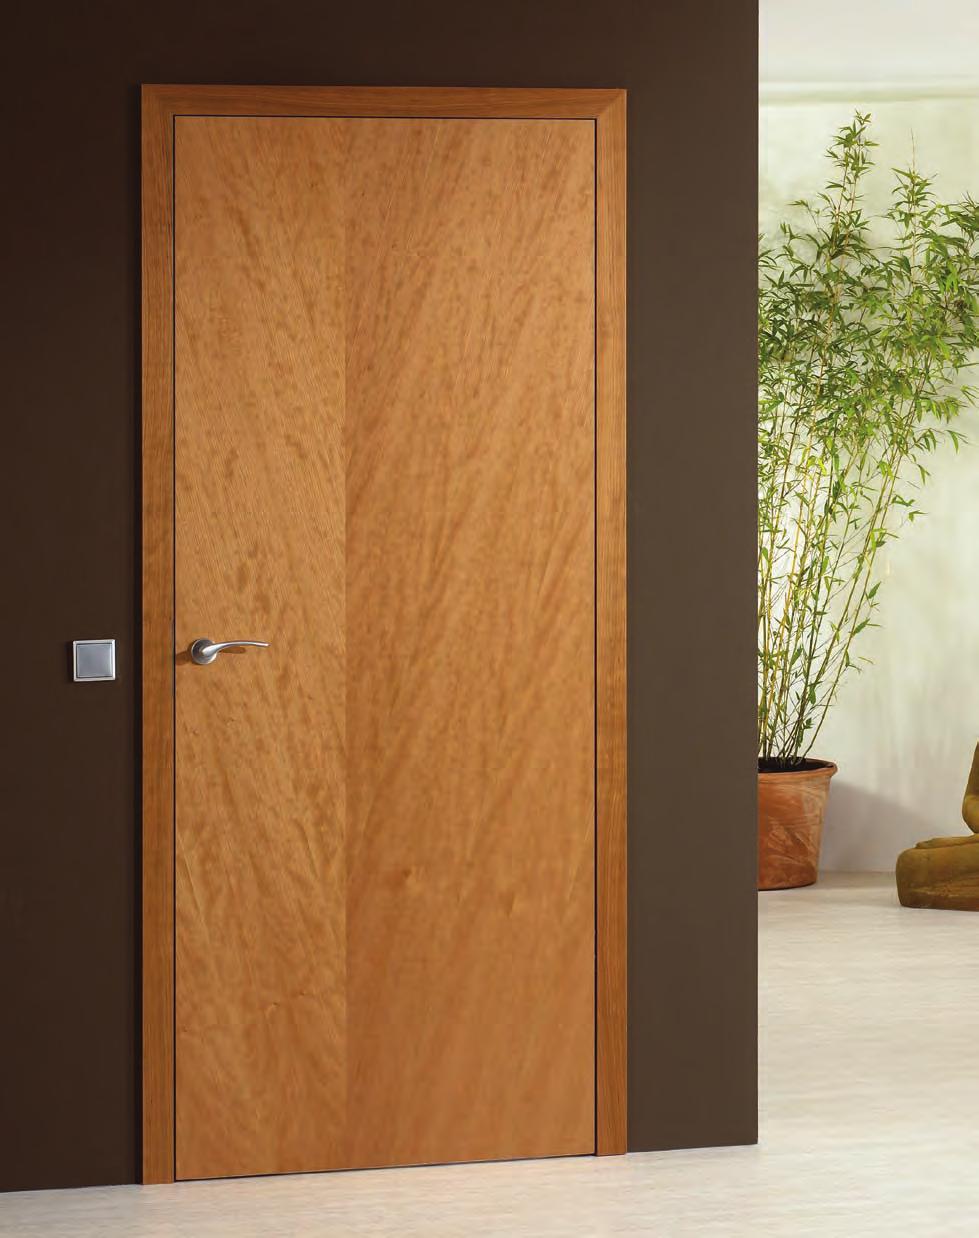 Decoration unnecessary Doors and frames are delivered fully finished. Model shown is Veneer-Art Type 806, flush single-face, American cherrywood lacquered.